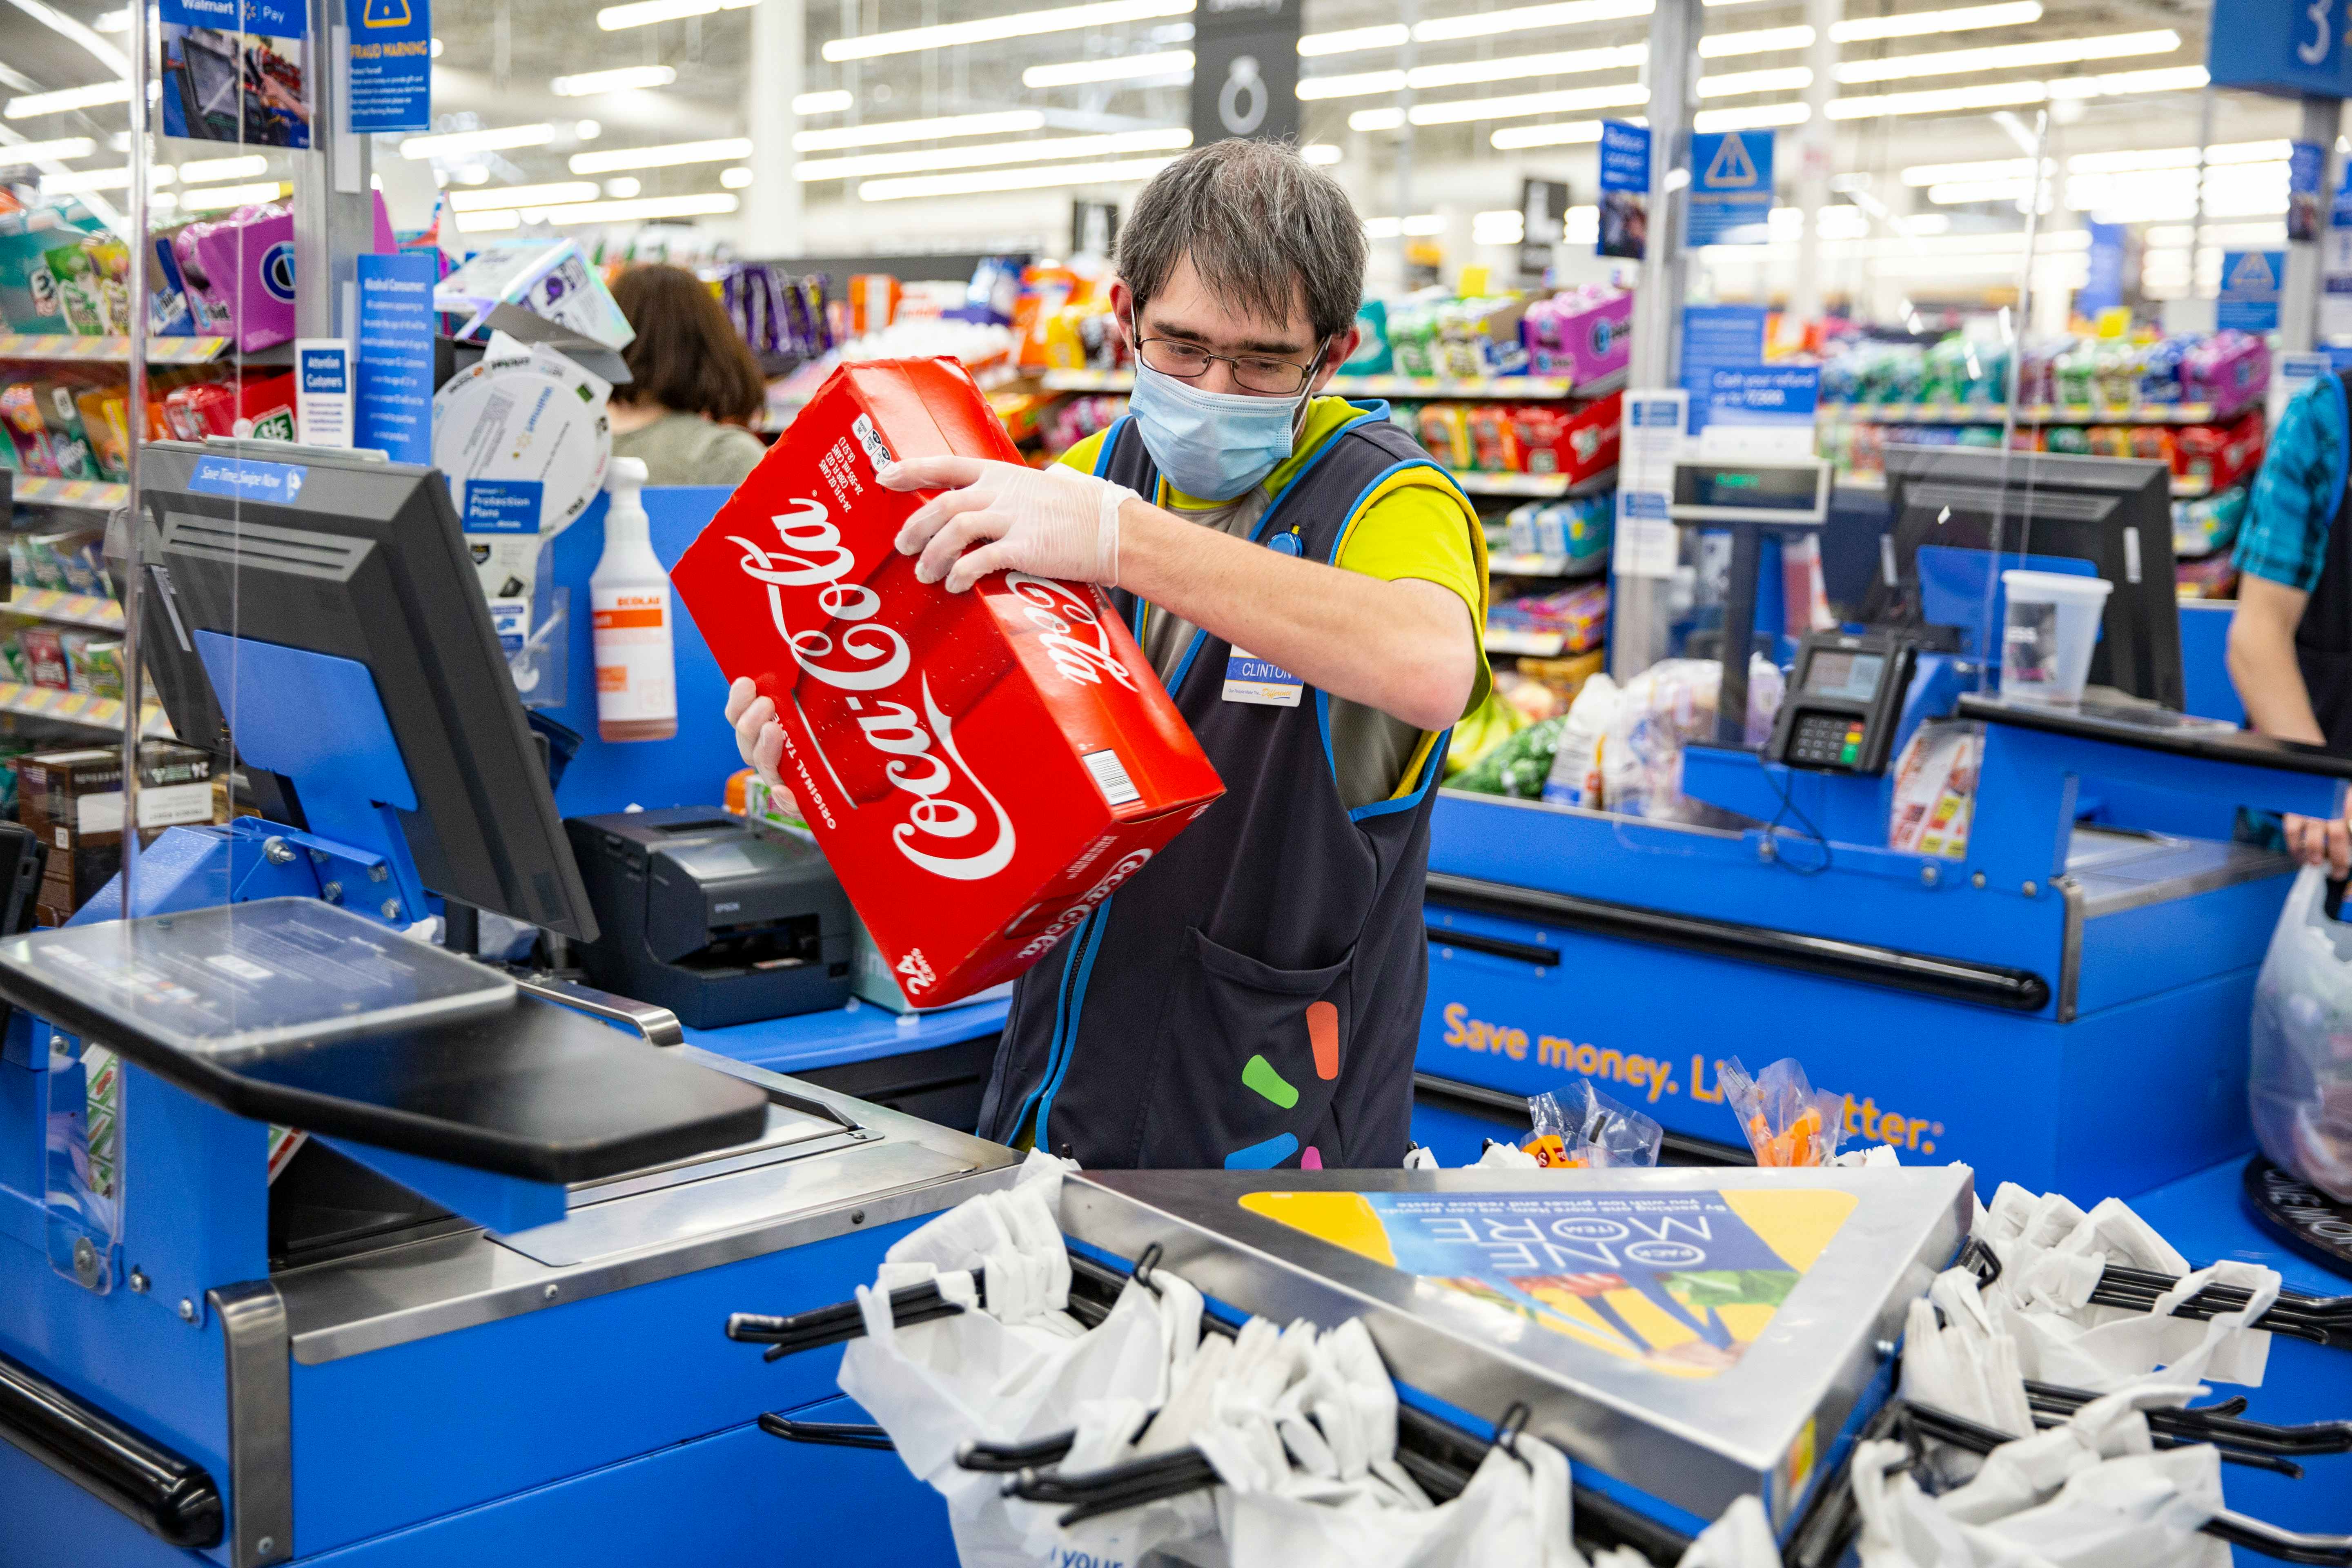 Walmart Employee wearing a mask and gloves ringing up a case of Coke at checkout.